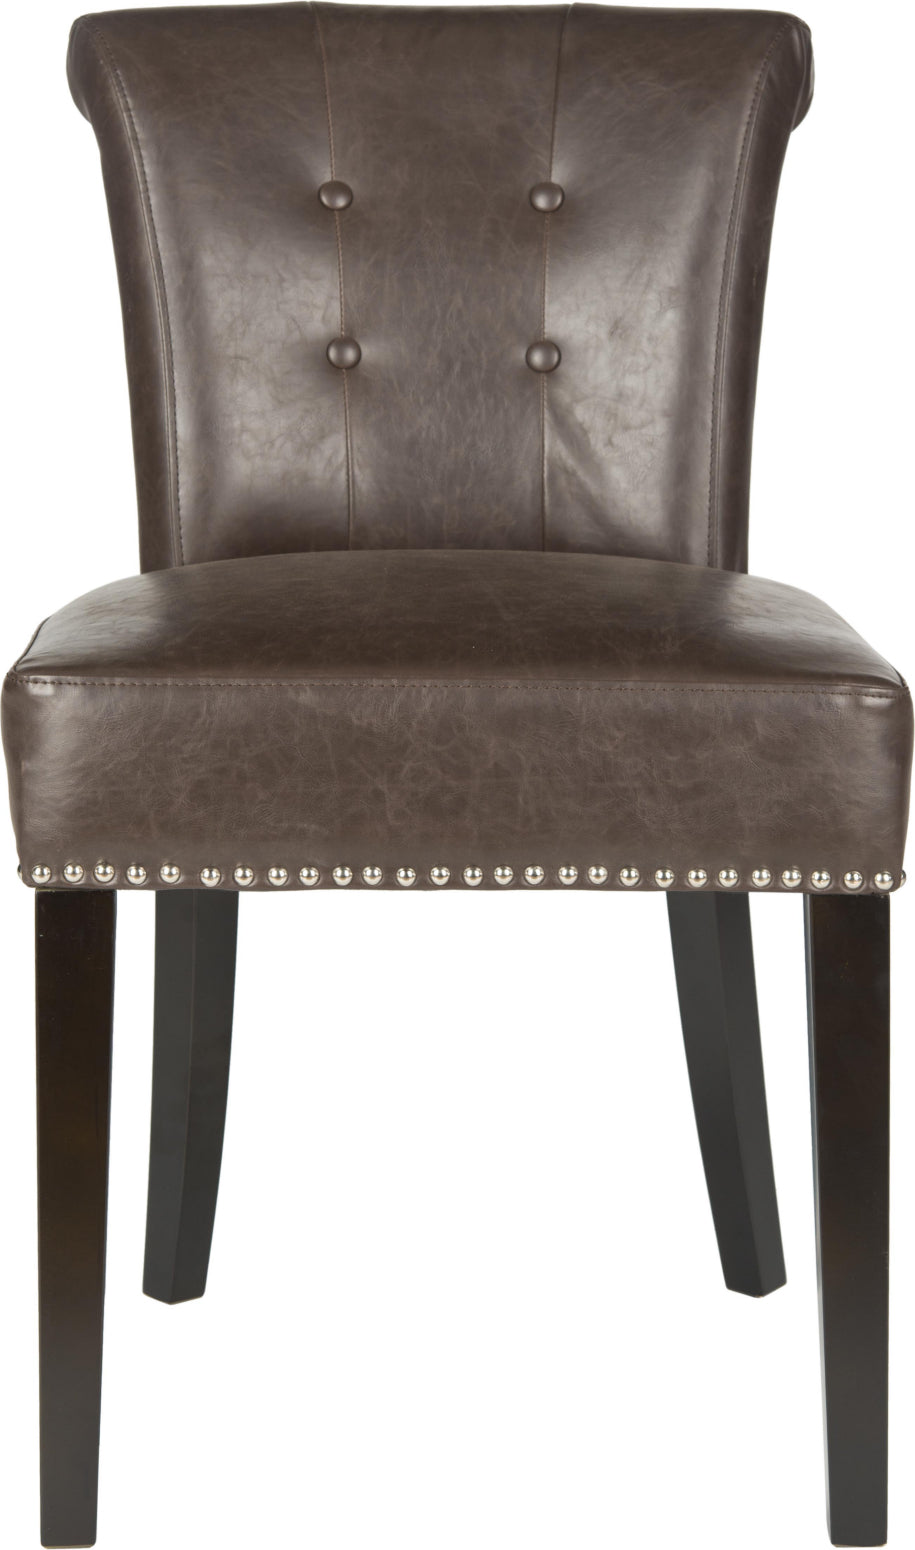 Safavieh Sinclair 21''H Ring Chair (SET Of 2)-Silver Nail Heads Antique Brown and Espresso Furniture main image